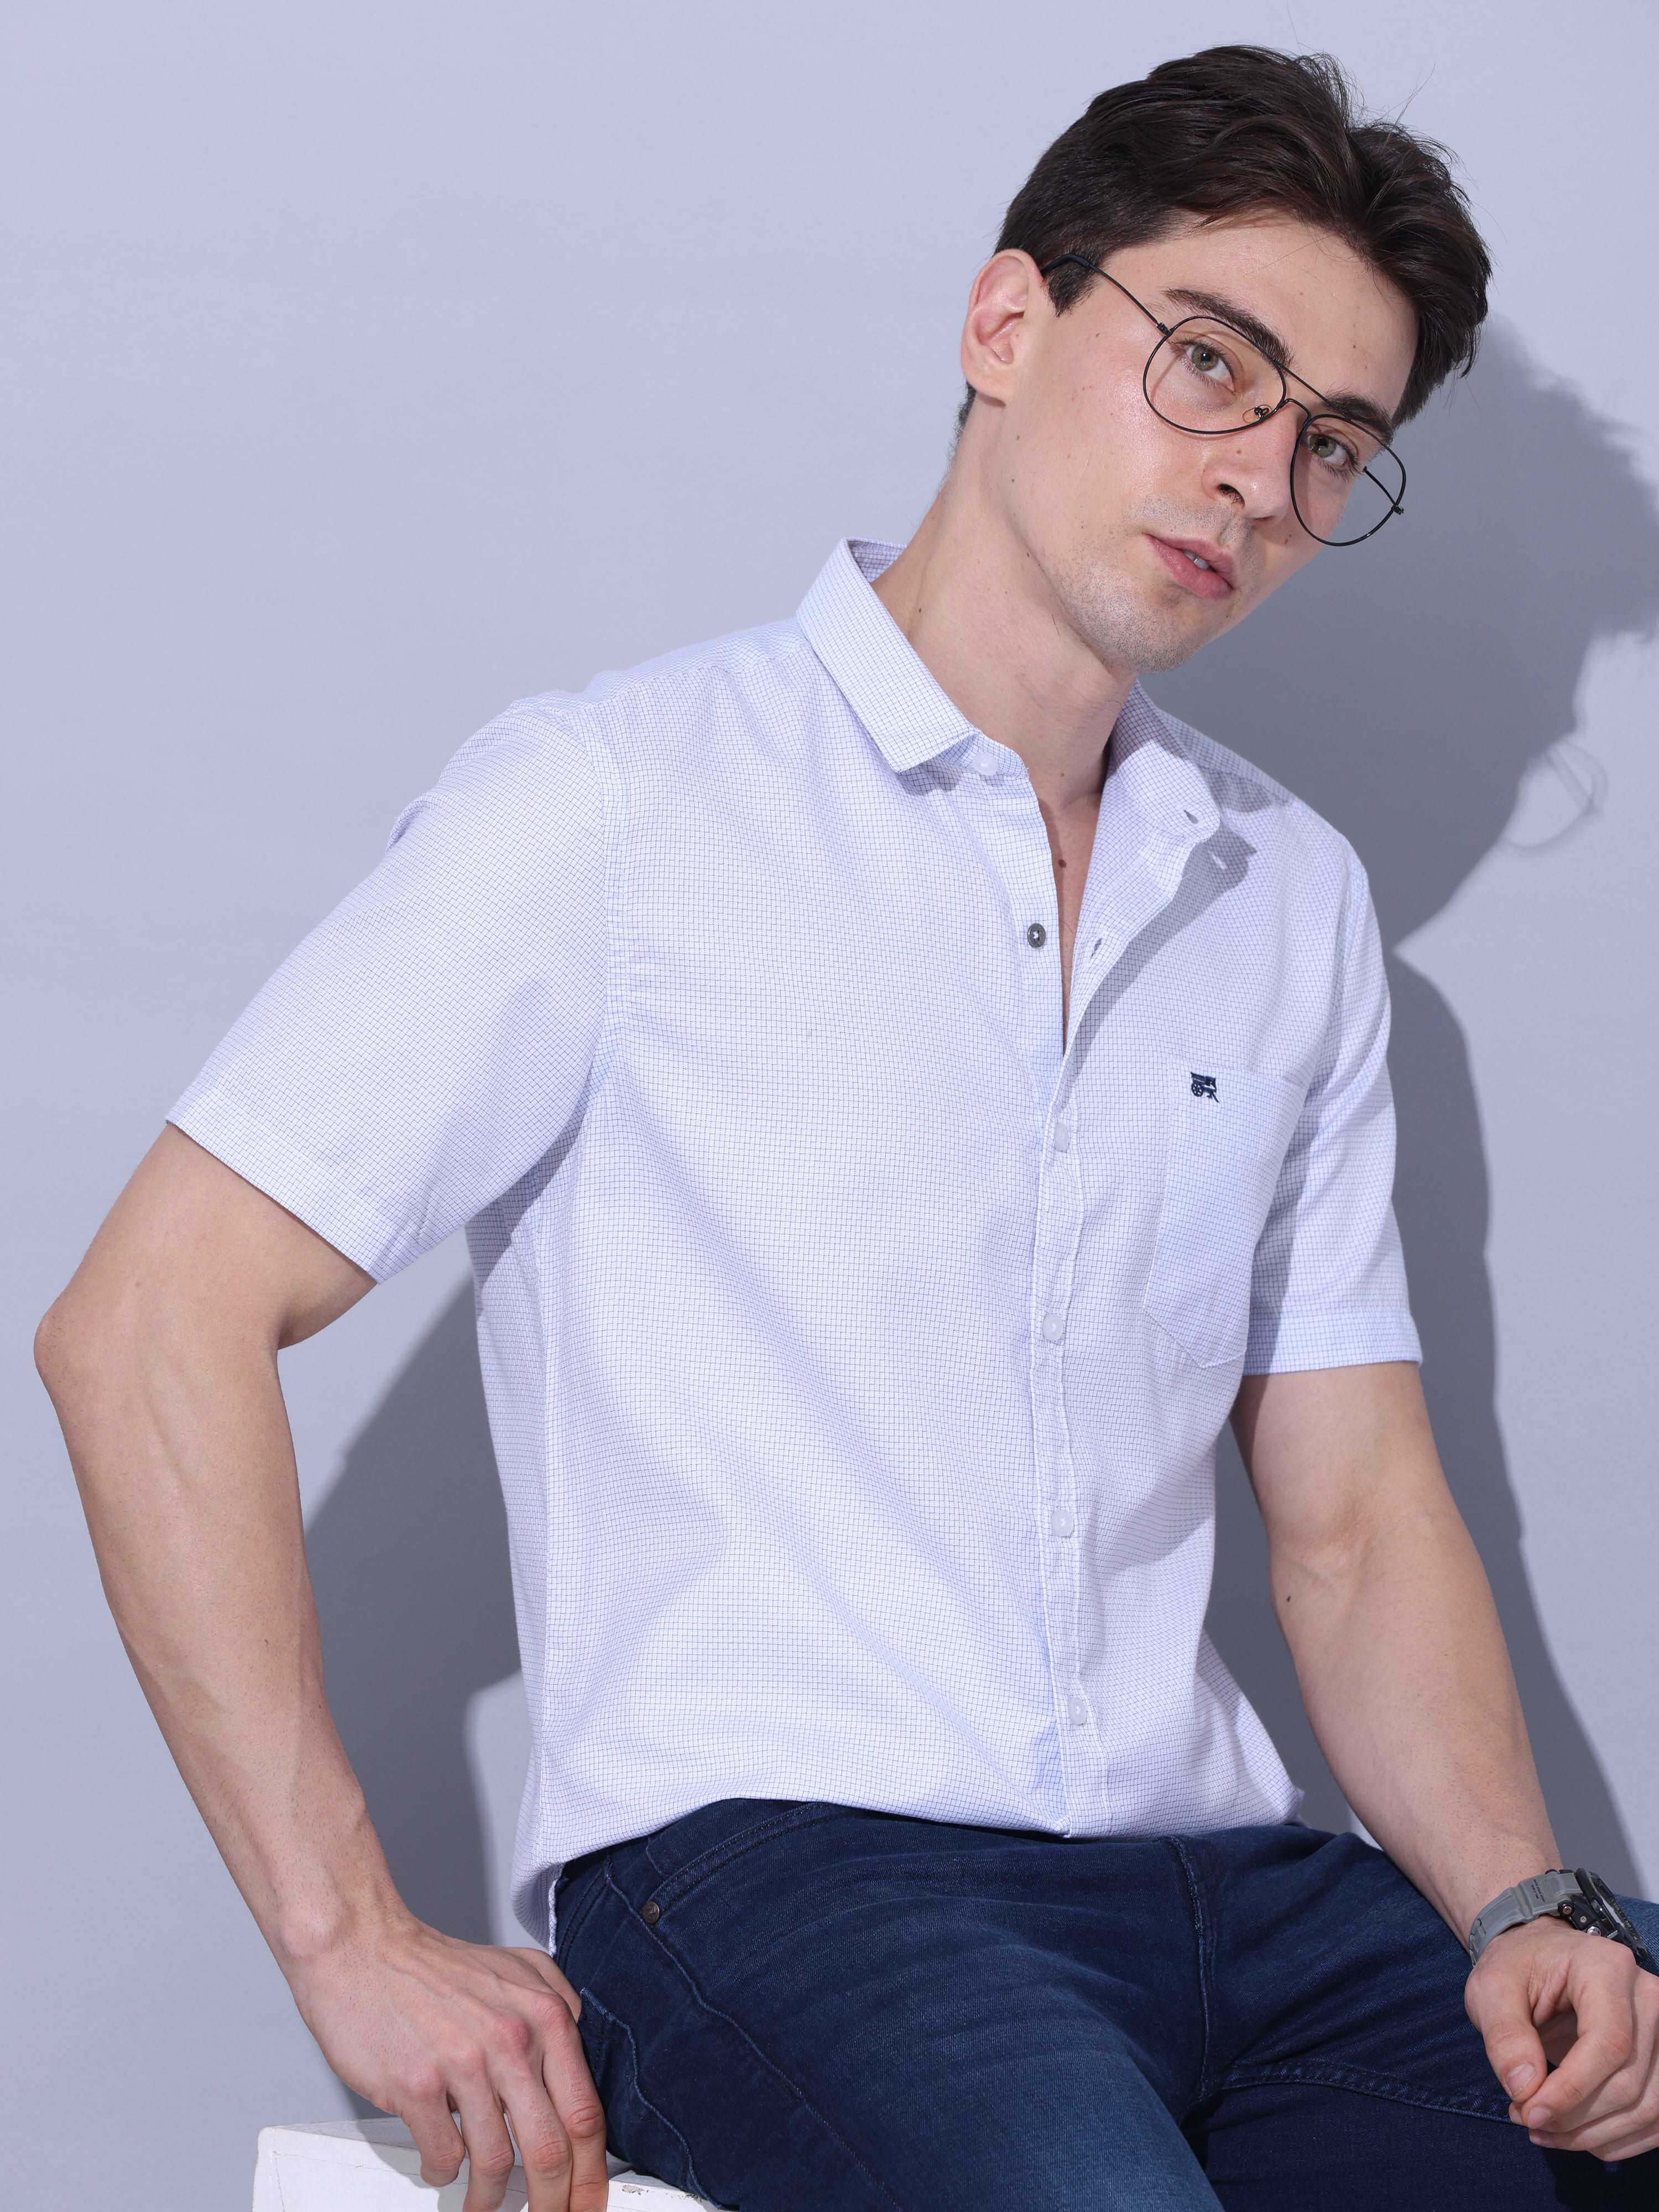 Blue Casual Half Sleeve Shirt shop online at Estilocus. • Half-sleeve printed shirt • Cut and sew placket • Regular collar • Single pocket with logo embroidery • Curved hemline • Finest quality sewing • Machine wash care • Suitable to wear with all types